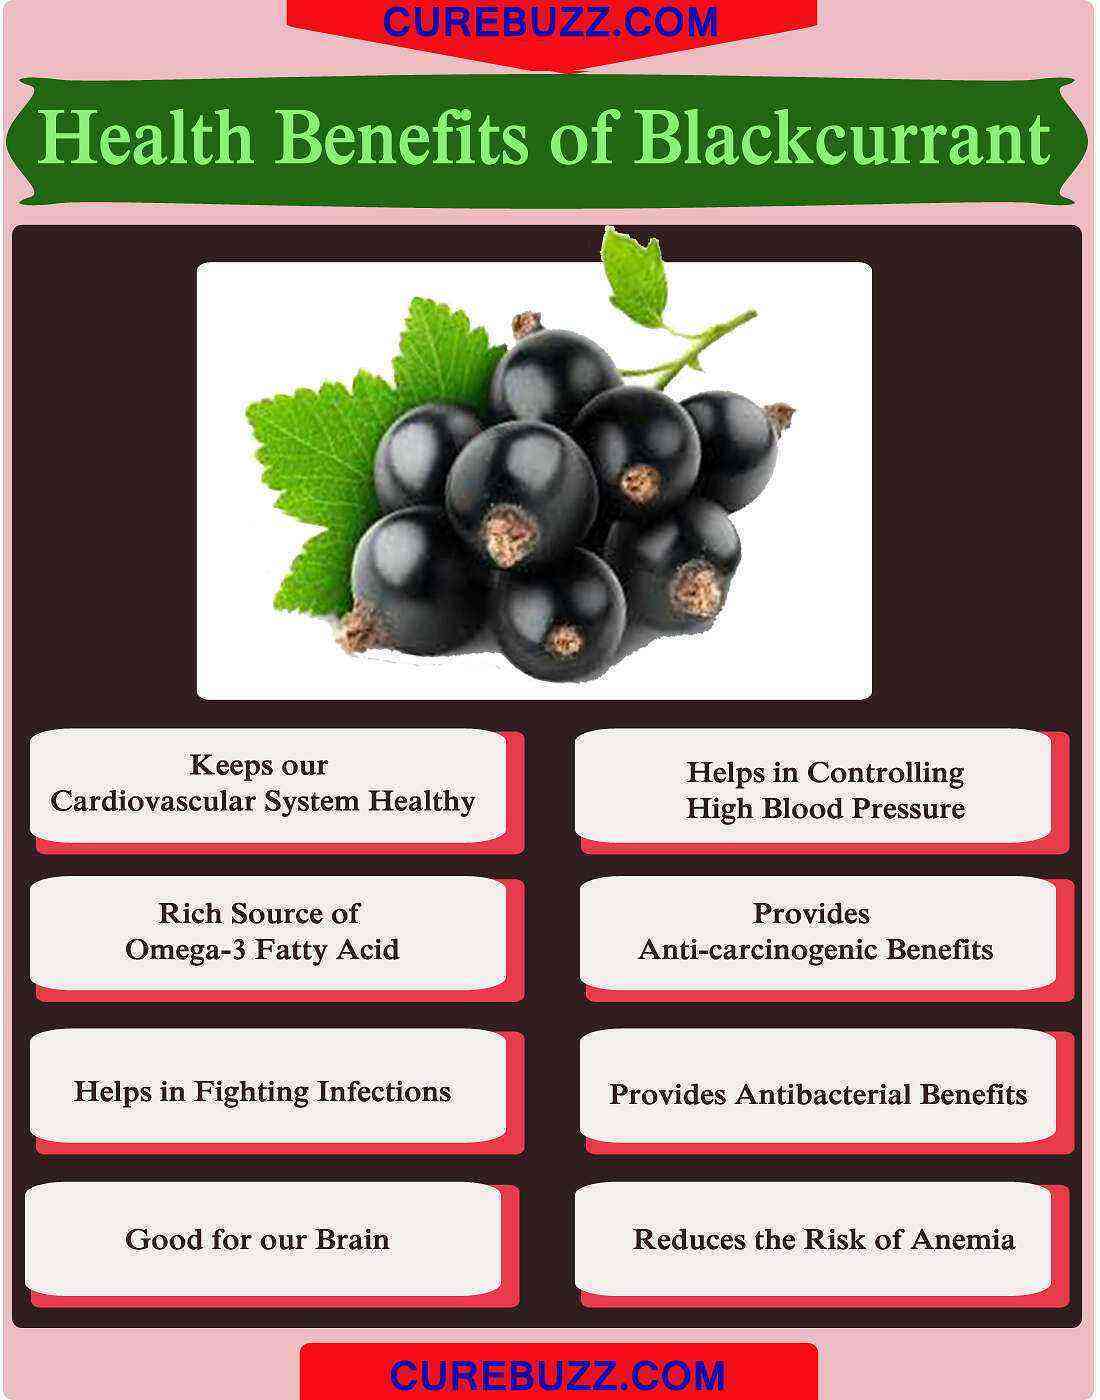 Currant (black) benefits and harms